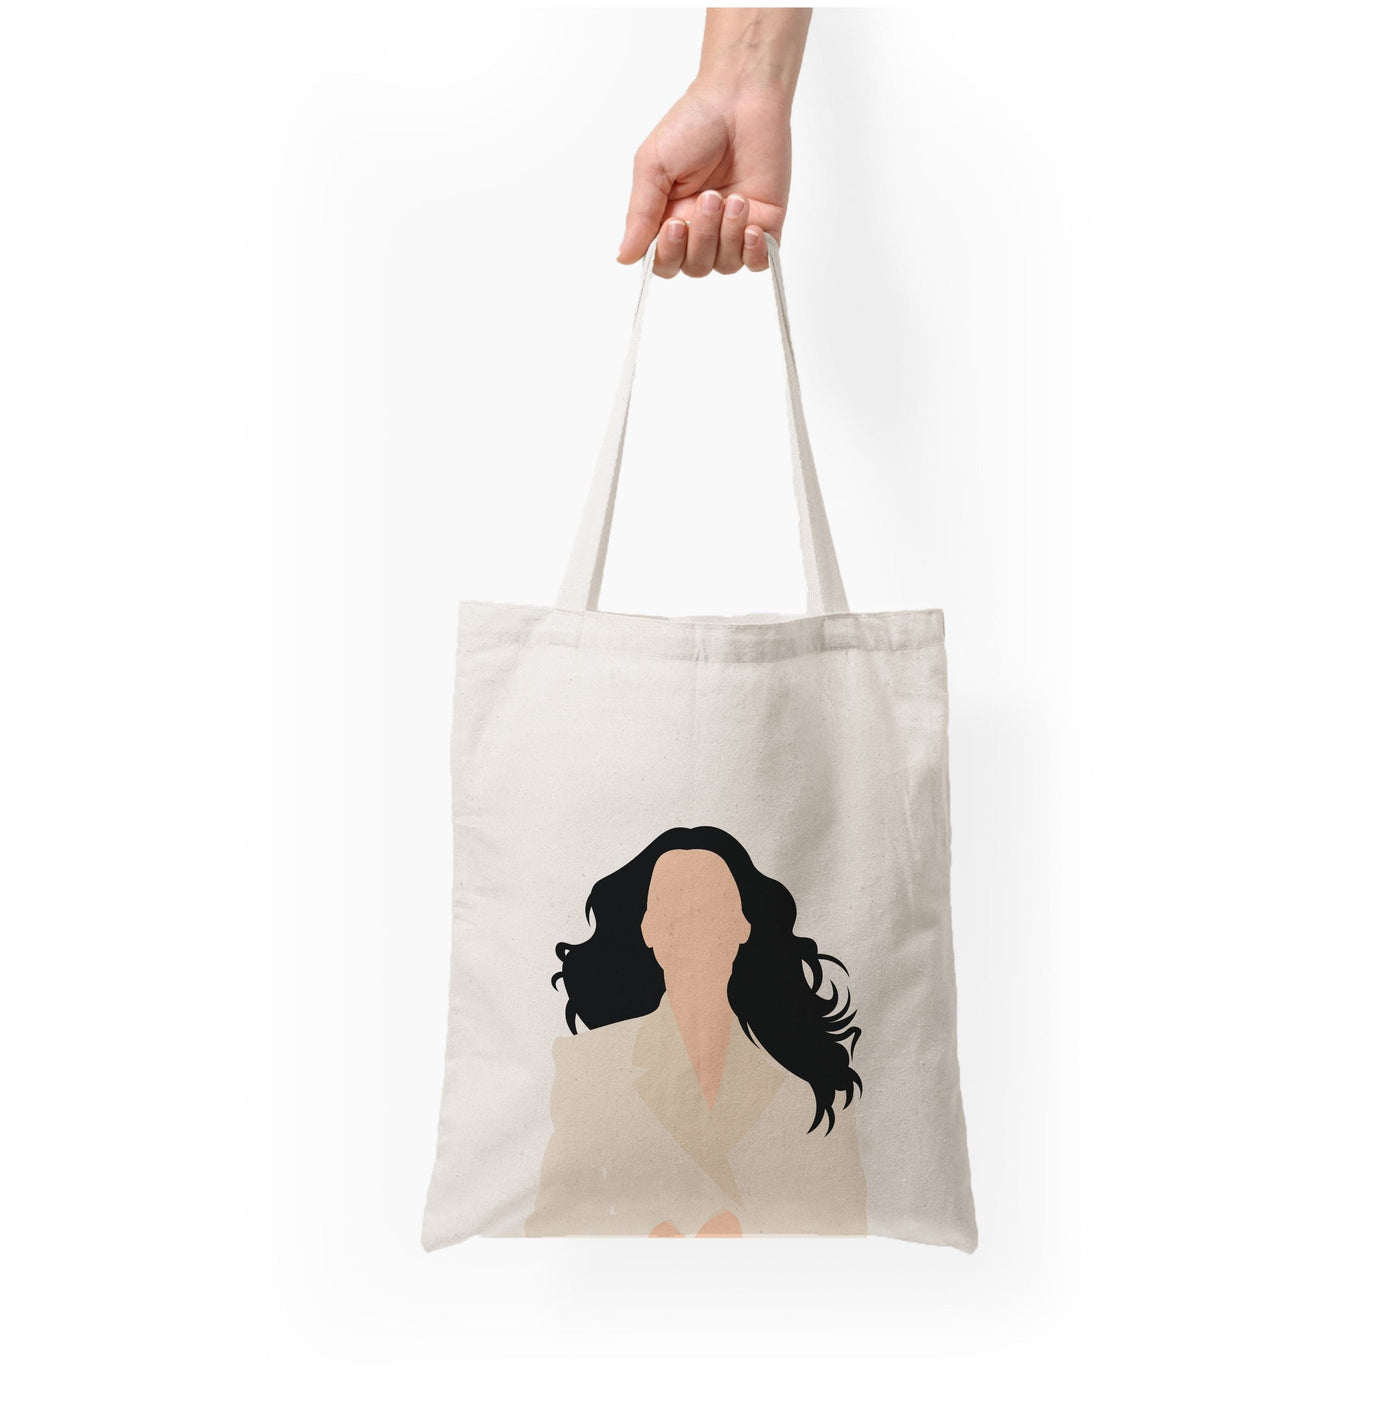 Her - Katy Perry Tote Bag